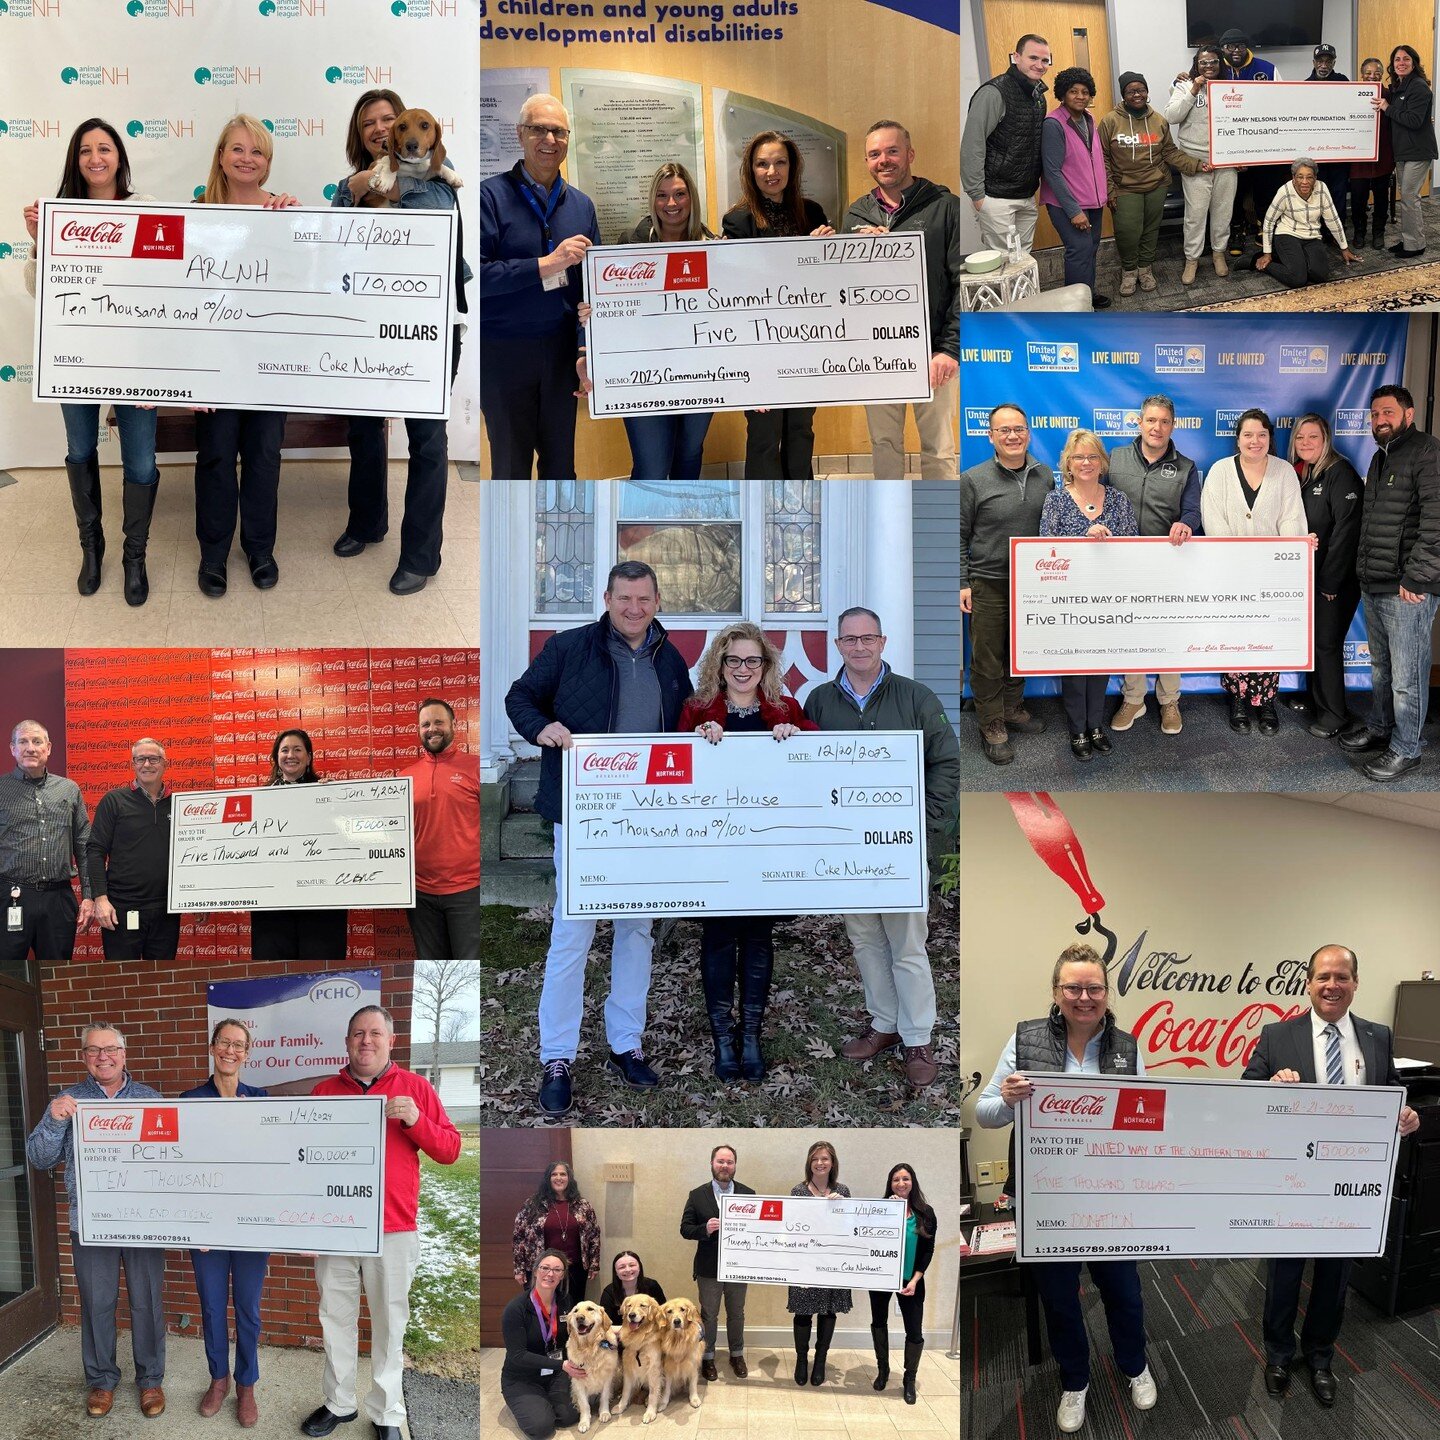 Playing a positive role in the community is an important part of our philosophy at Coke Northeast. We believe in living our values and strive to enrich our local communities through advocacy, partnerships, and creating shared value. At the end of 202